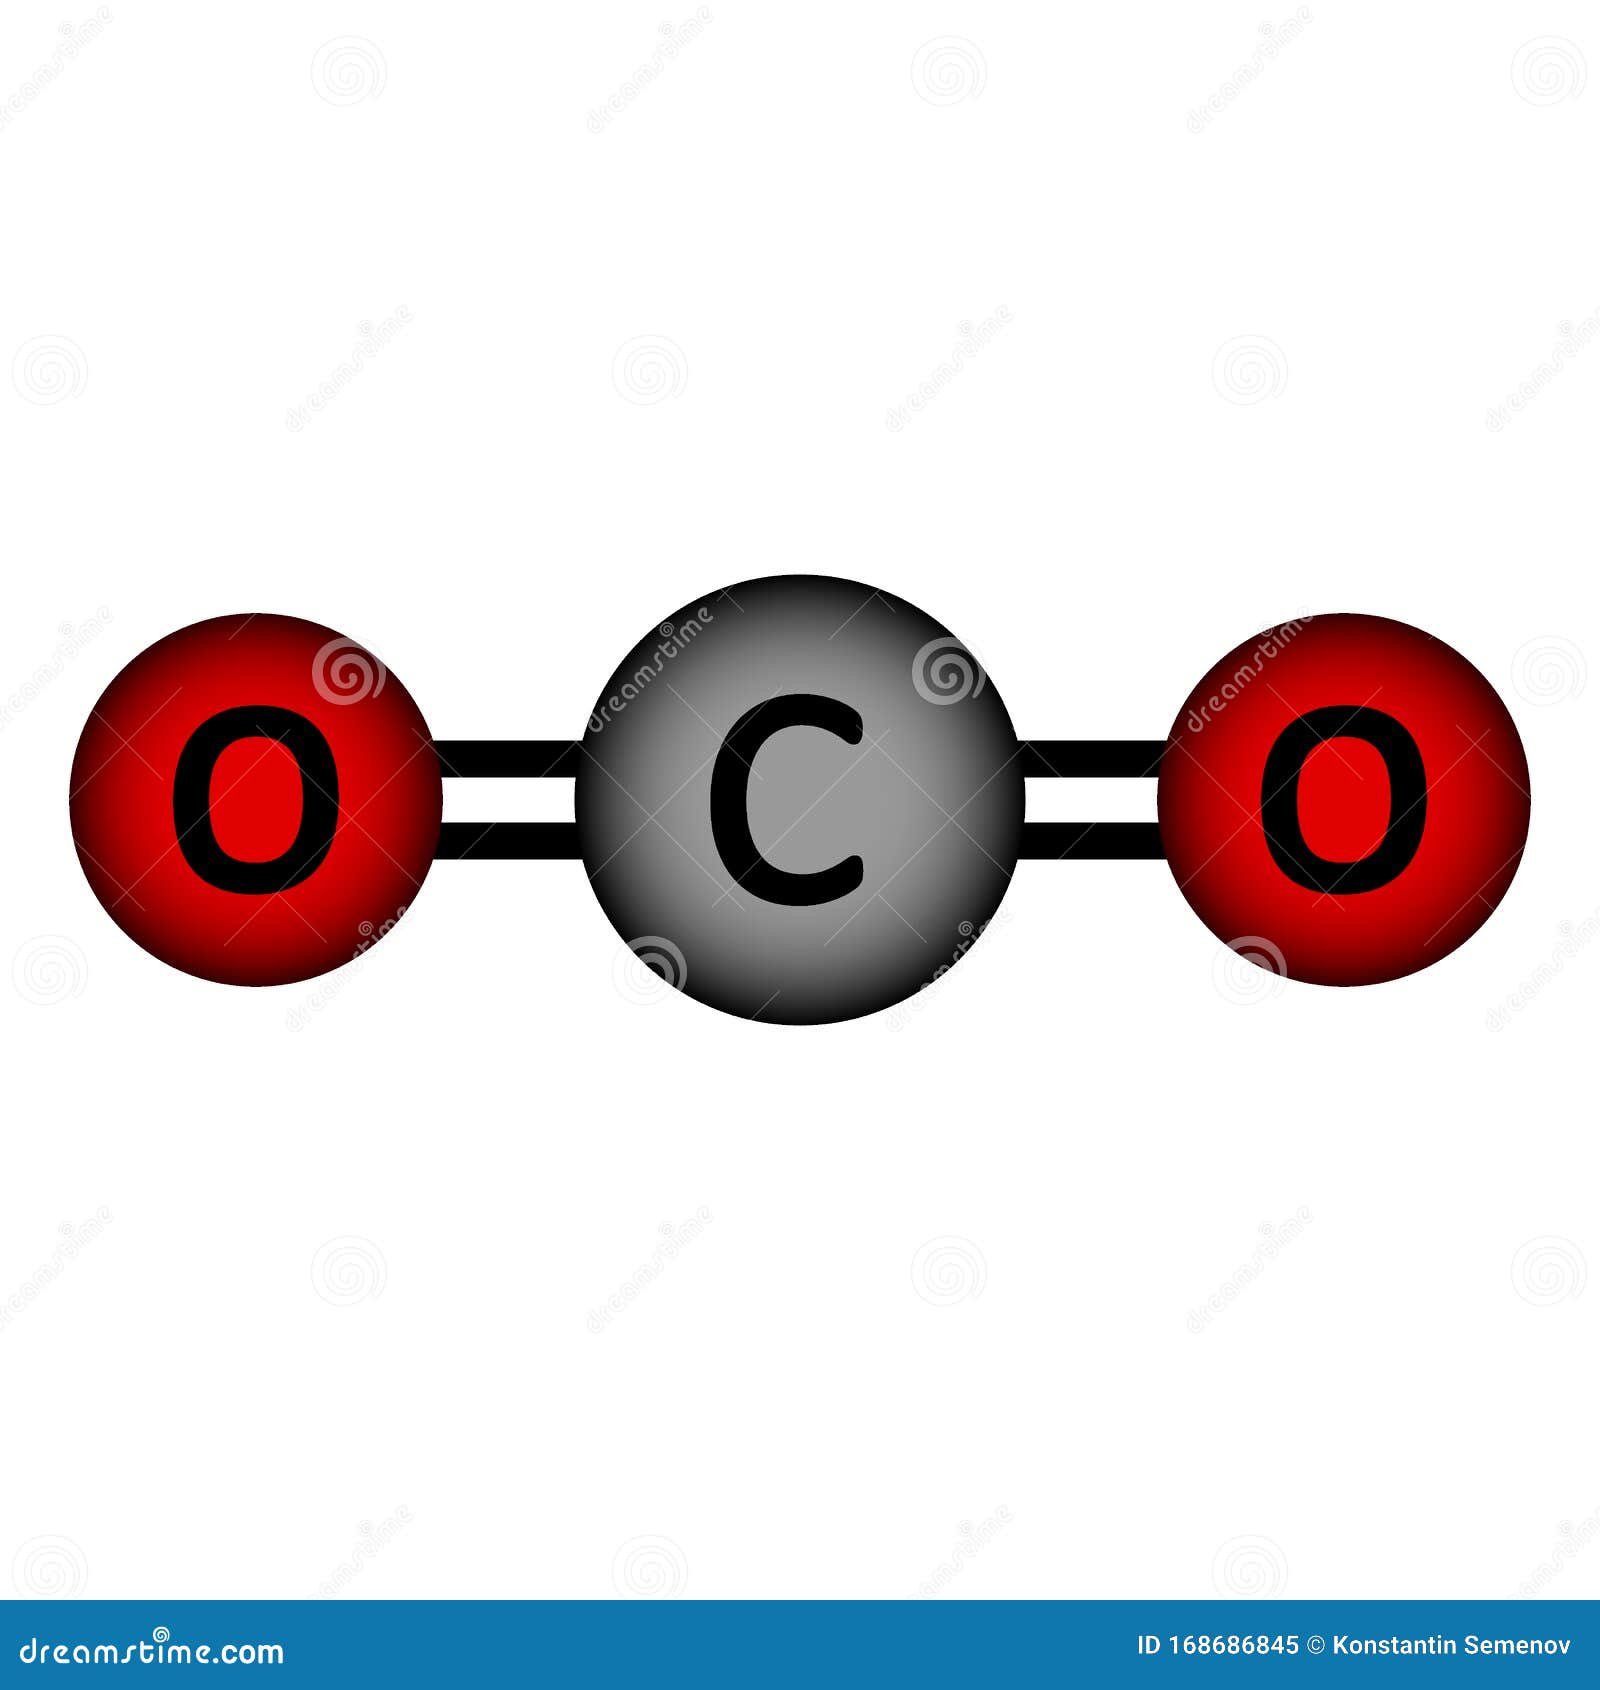 Albums 94+ Images what is the shape of a carbon dioxide molecule Stunning